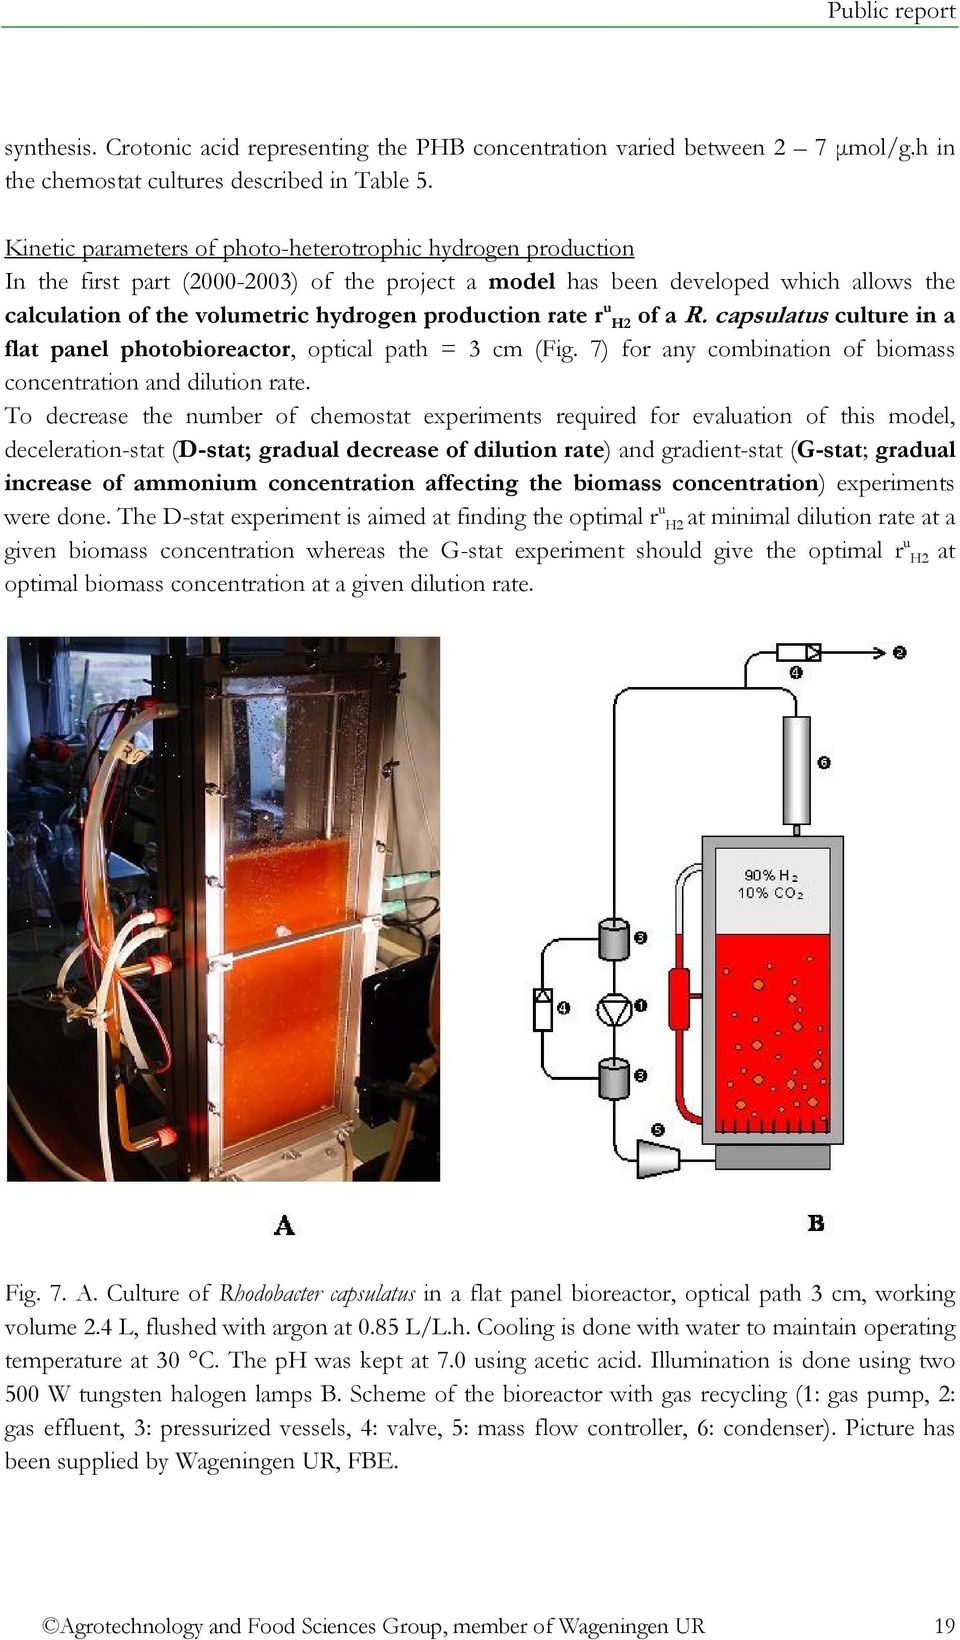 production rate r u H2 of a R. capsulatus culture in a flat panel photobioreactor, optical path = 3 cm (Fig. 7) for any combination of biomass concentration and dilution rate.